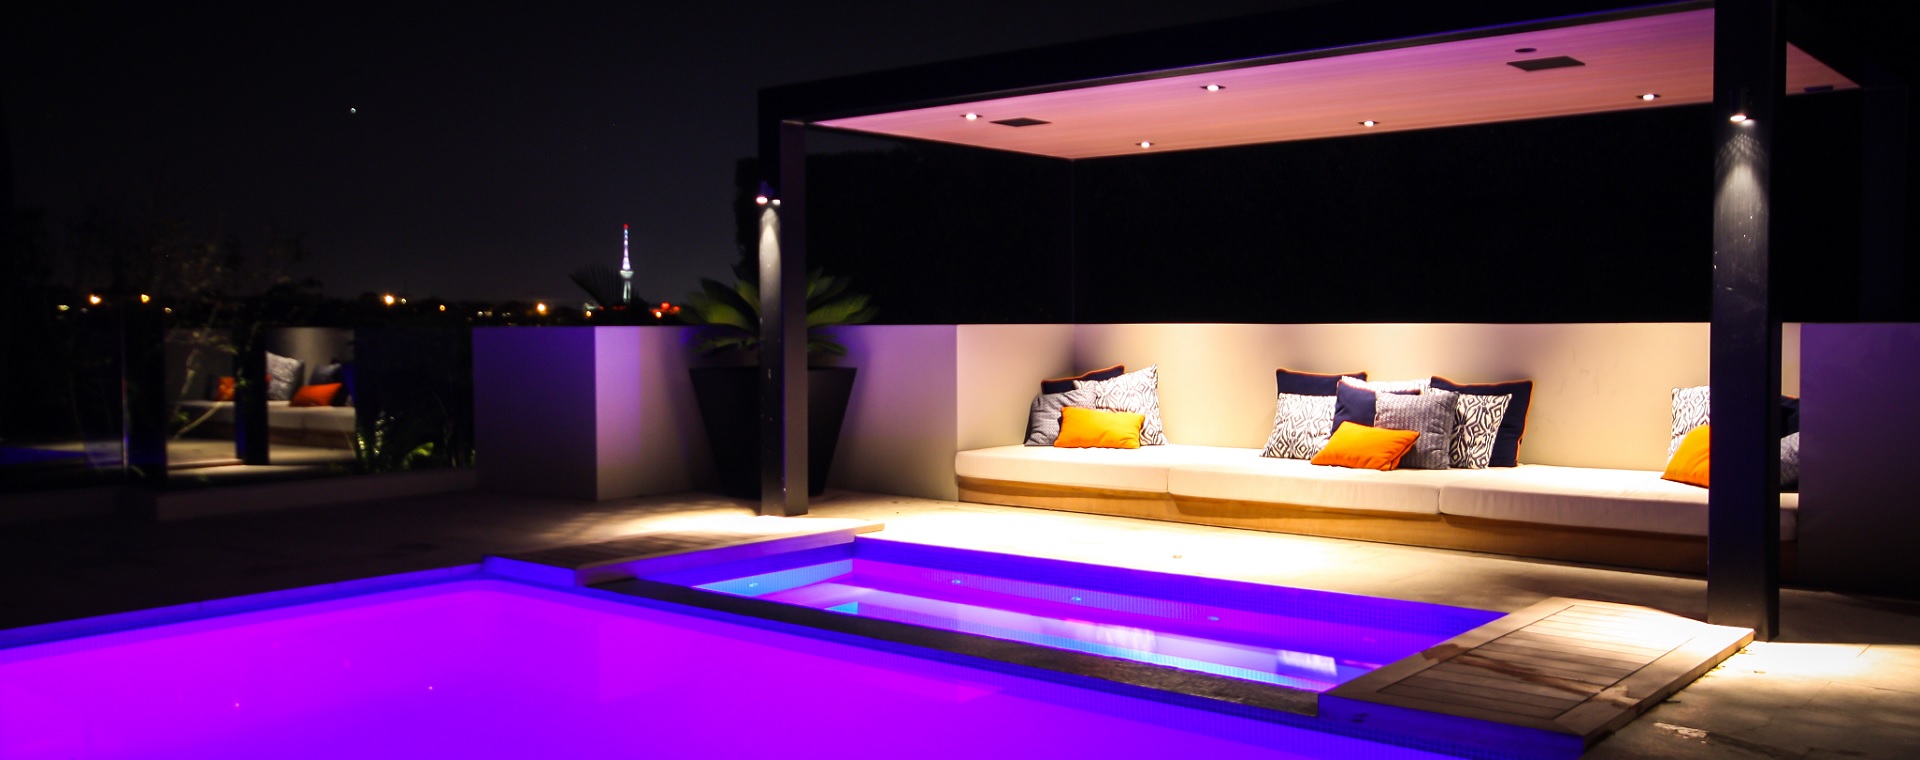 Pool cabana at night showing lighting control and in-ceiling speakers for enjoyment of music or moives